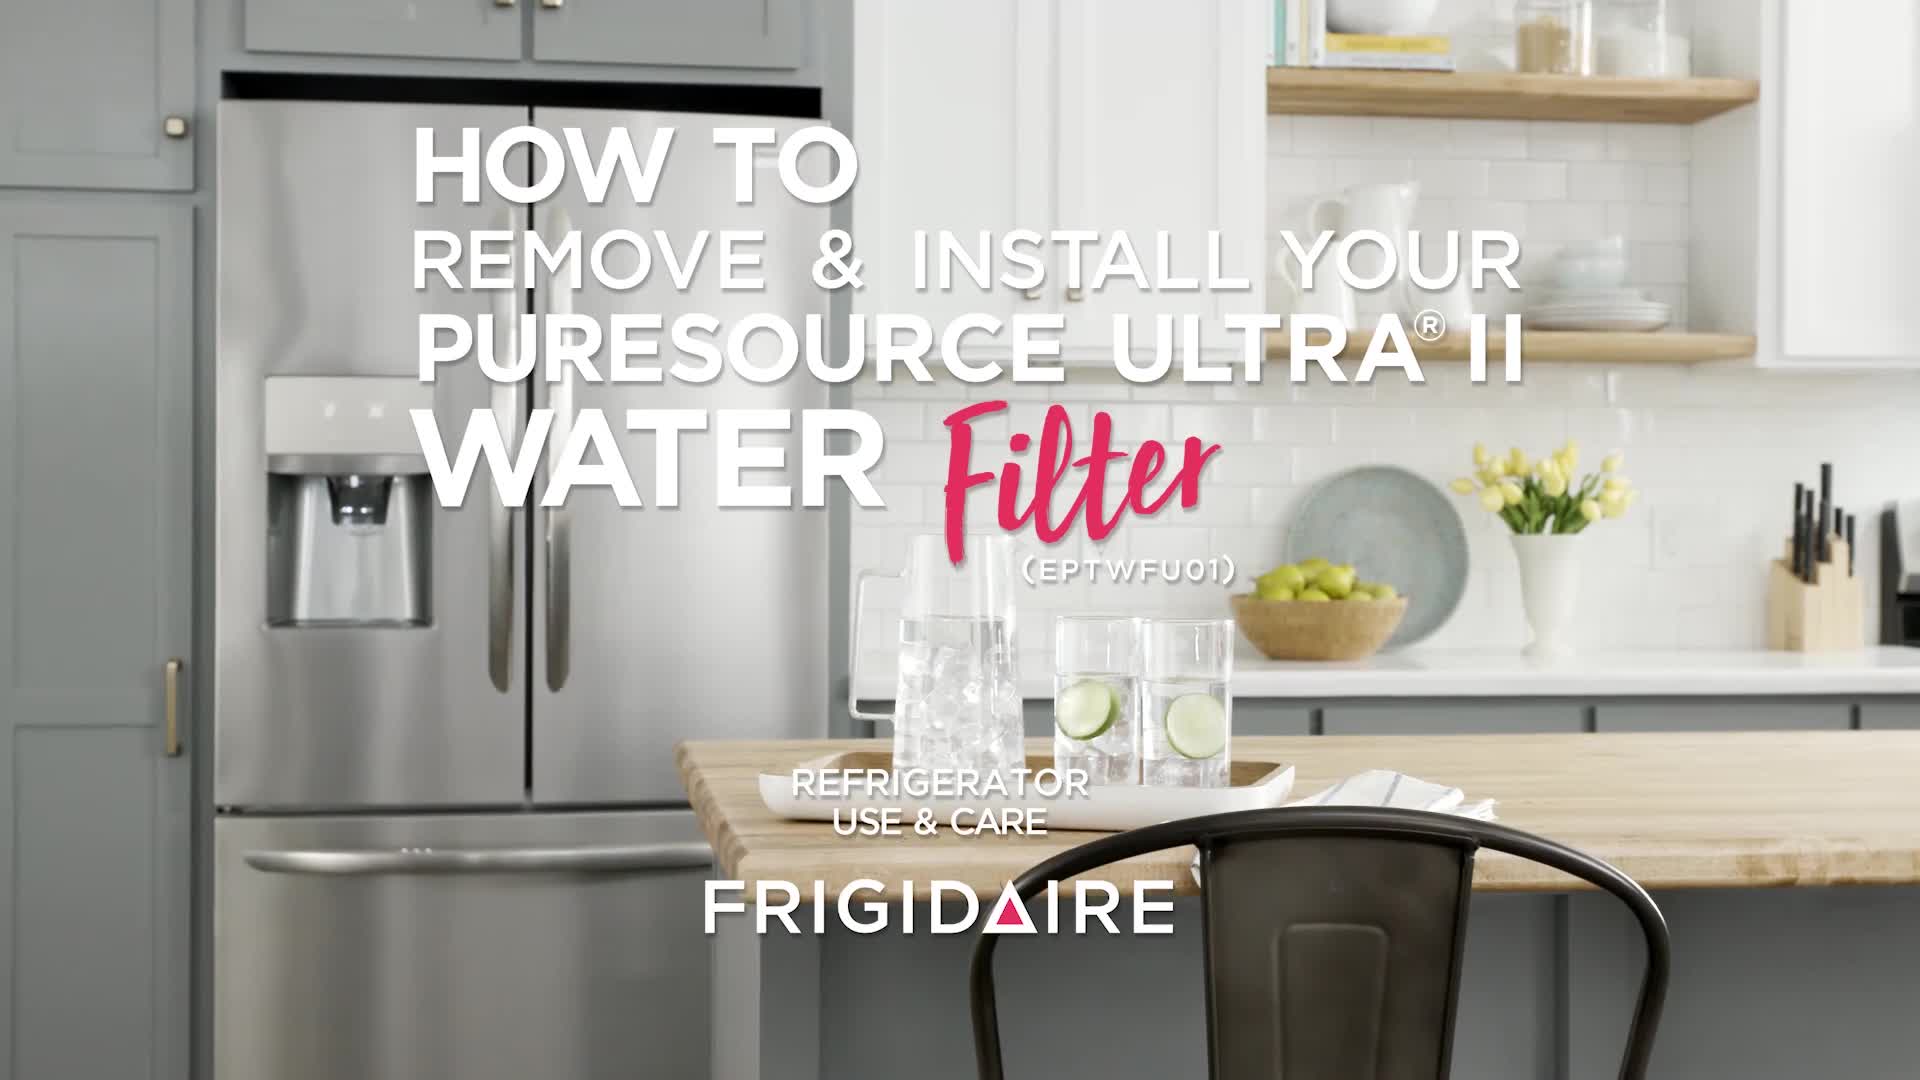 EPTWFU01 for sale online Frigidaire PureSource Ultra II Water//Ice Refrigerator Filter